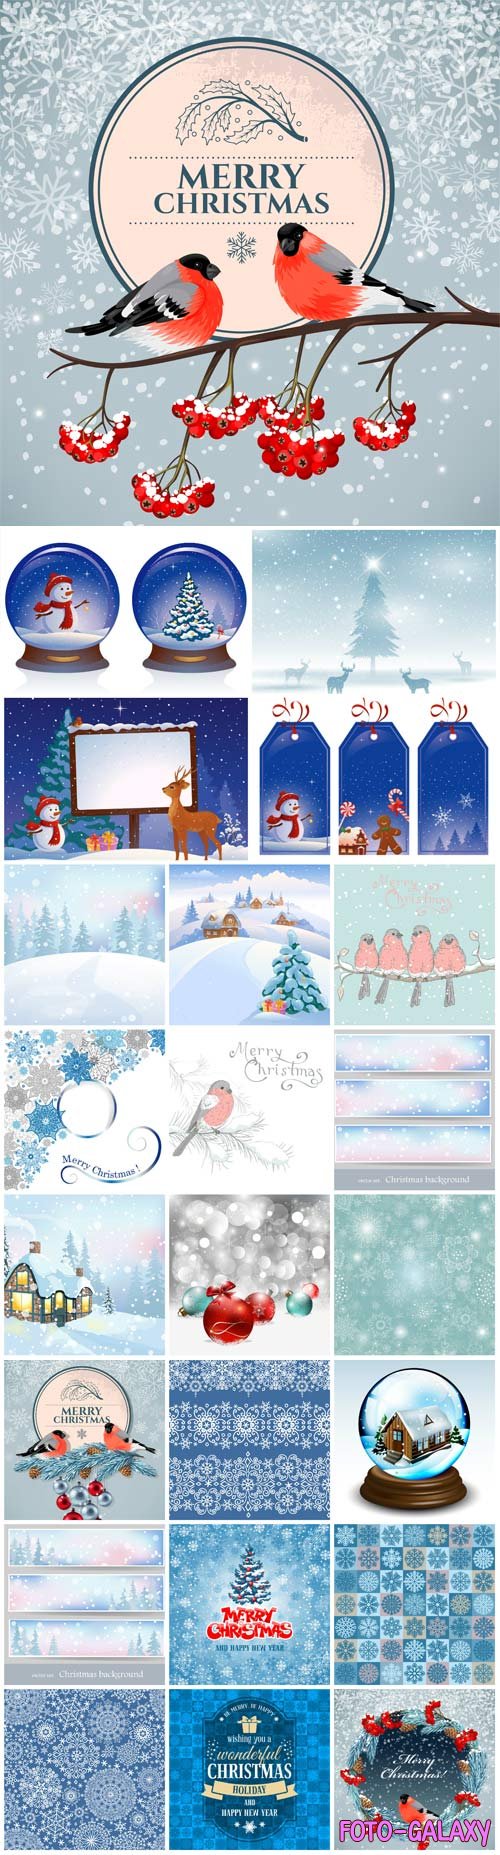 New Year and Christmas illustrations in vector 10